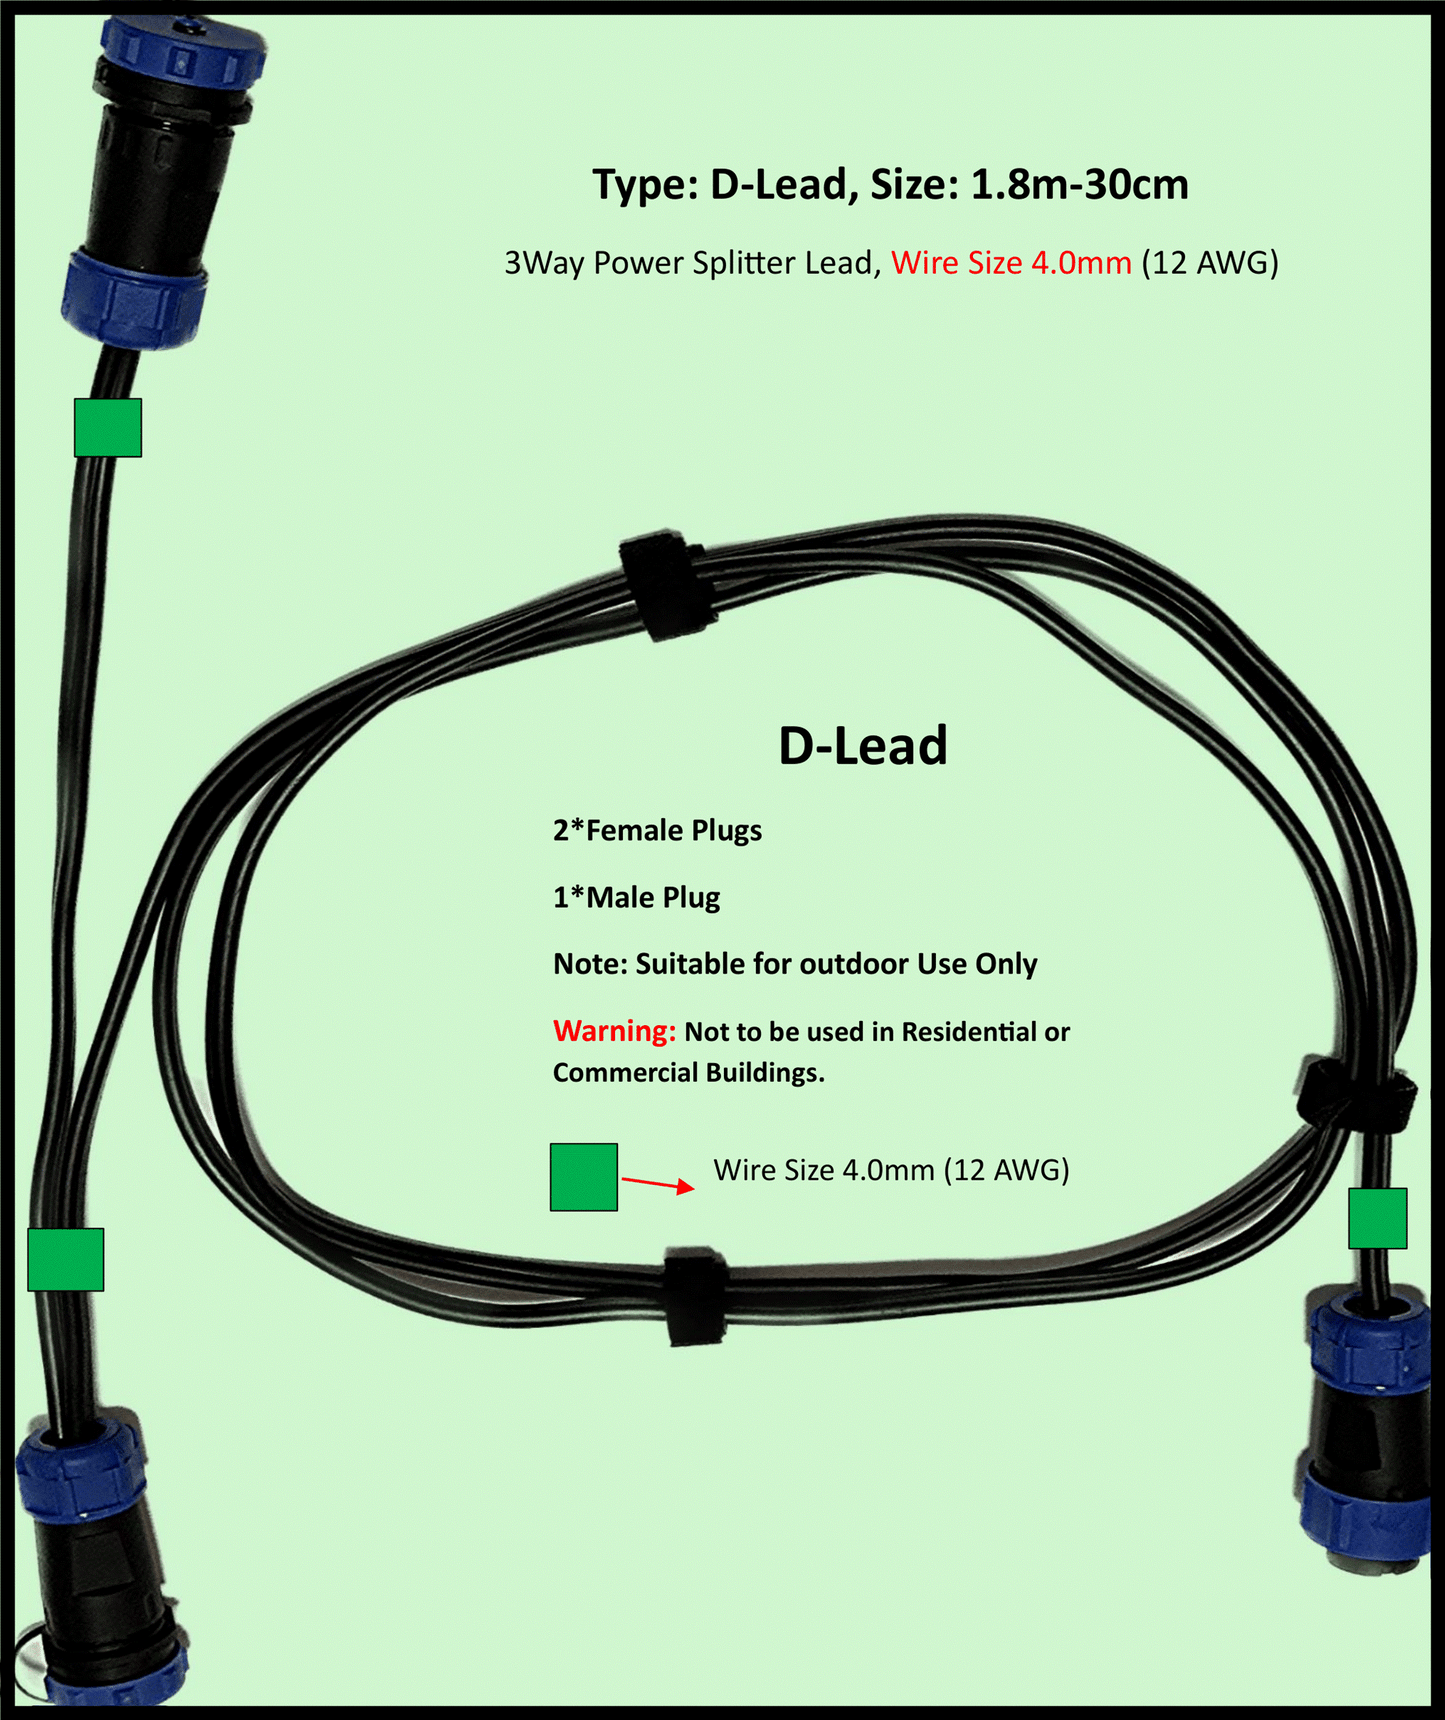 Type: D-Lead DIY, 12-24V DC, Maximum 22A Extension Cable, 4.0mm(12AWG), 1 to 2-Way power splitter, Length: 1.8m – 30cm, Water and Dustproof cable plugs rated IP68. Type: D-Lead is designed for use outdoors in garden, pergola, driveways, front gate lighting, agricultural building lighting, agriculture equipment lighting for the purpose of suppling ELV (Extra Low Voltage) power to LED lights.